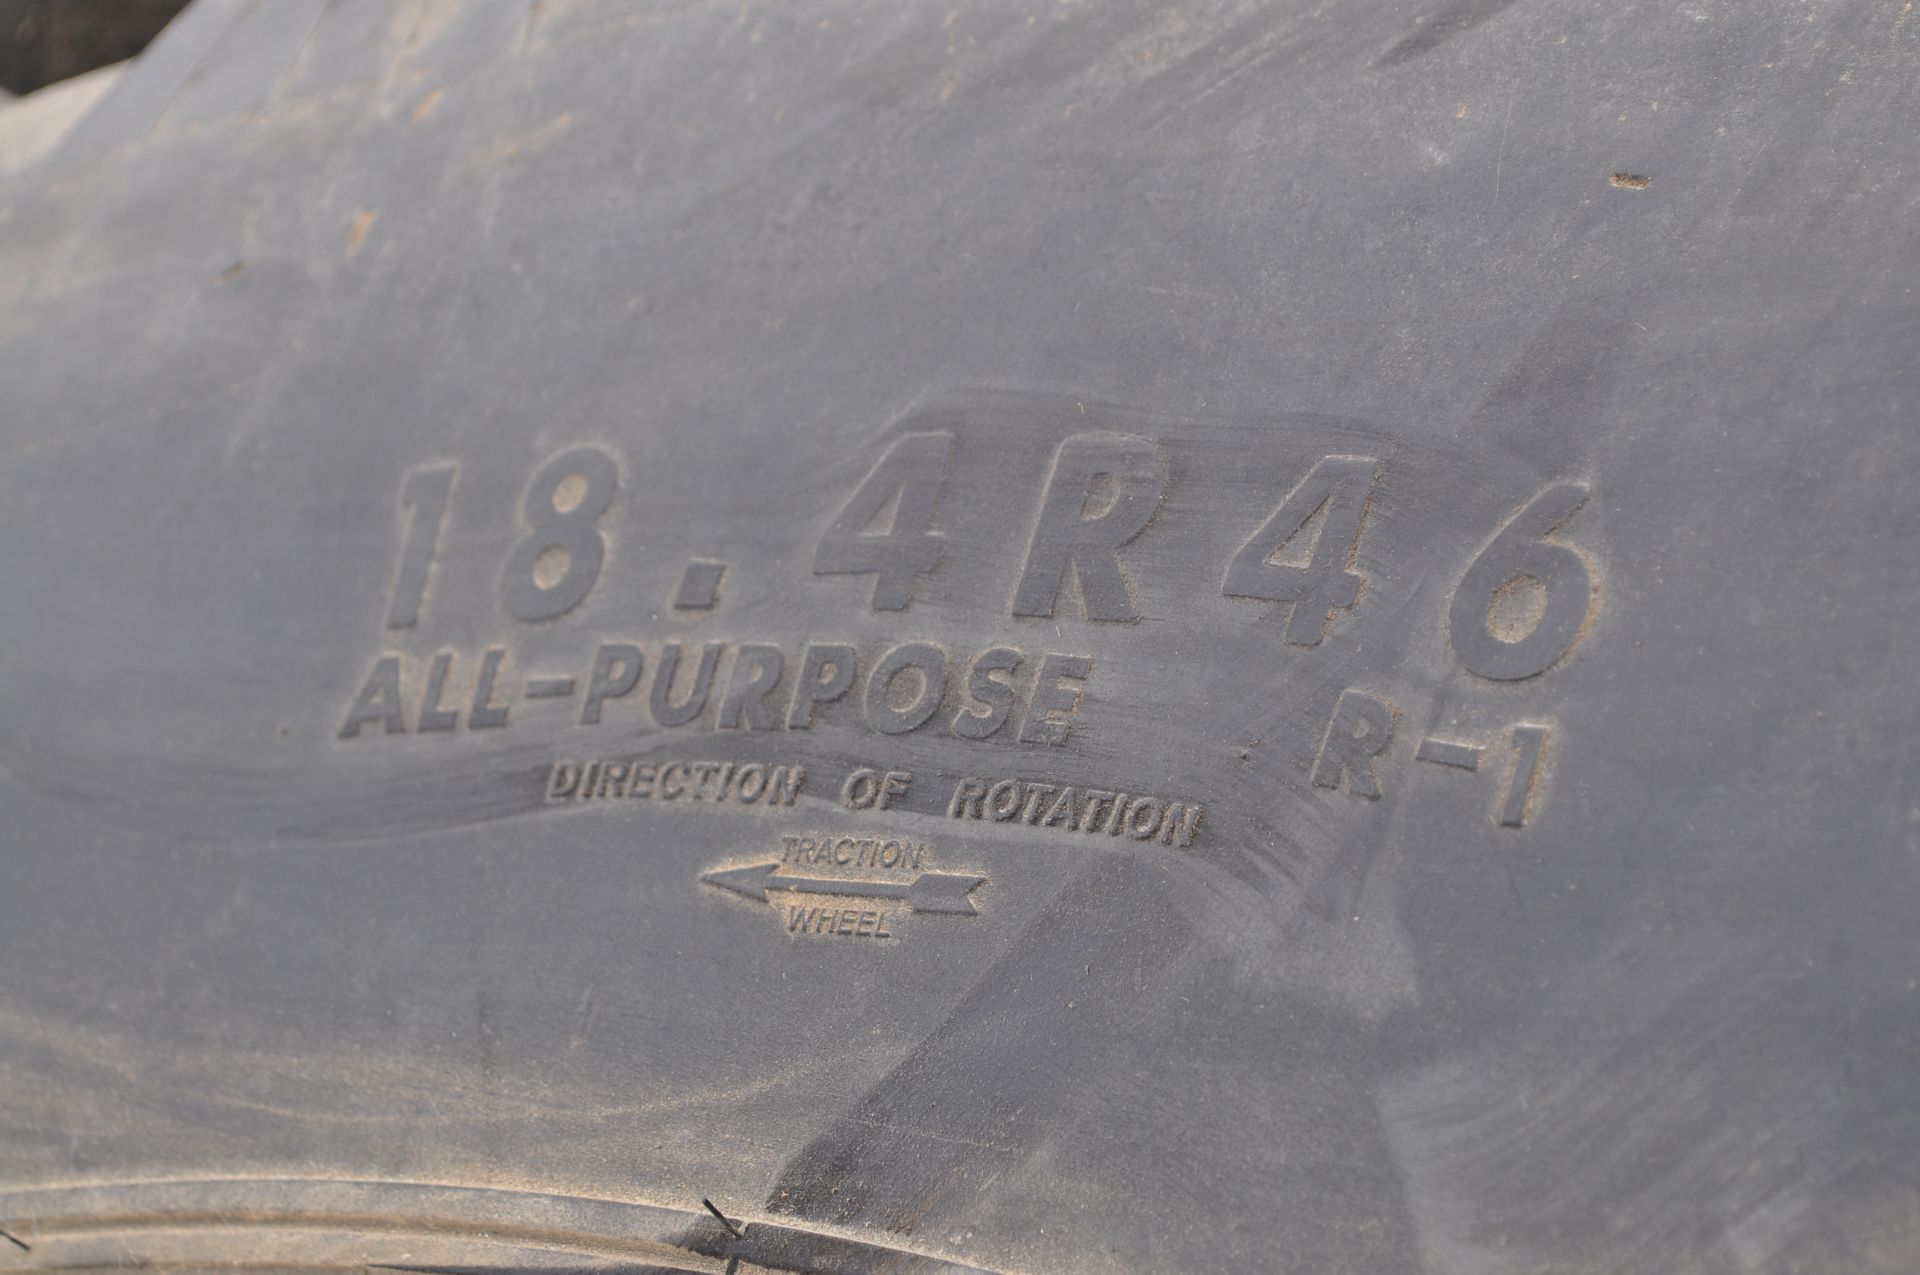 pair 18.4 R 46 tires - Image 3 of 3